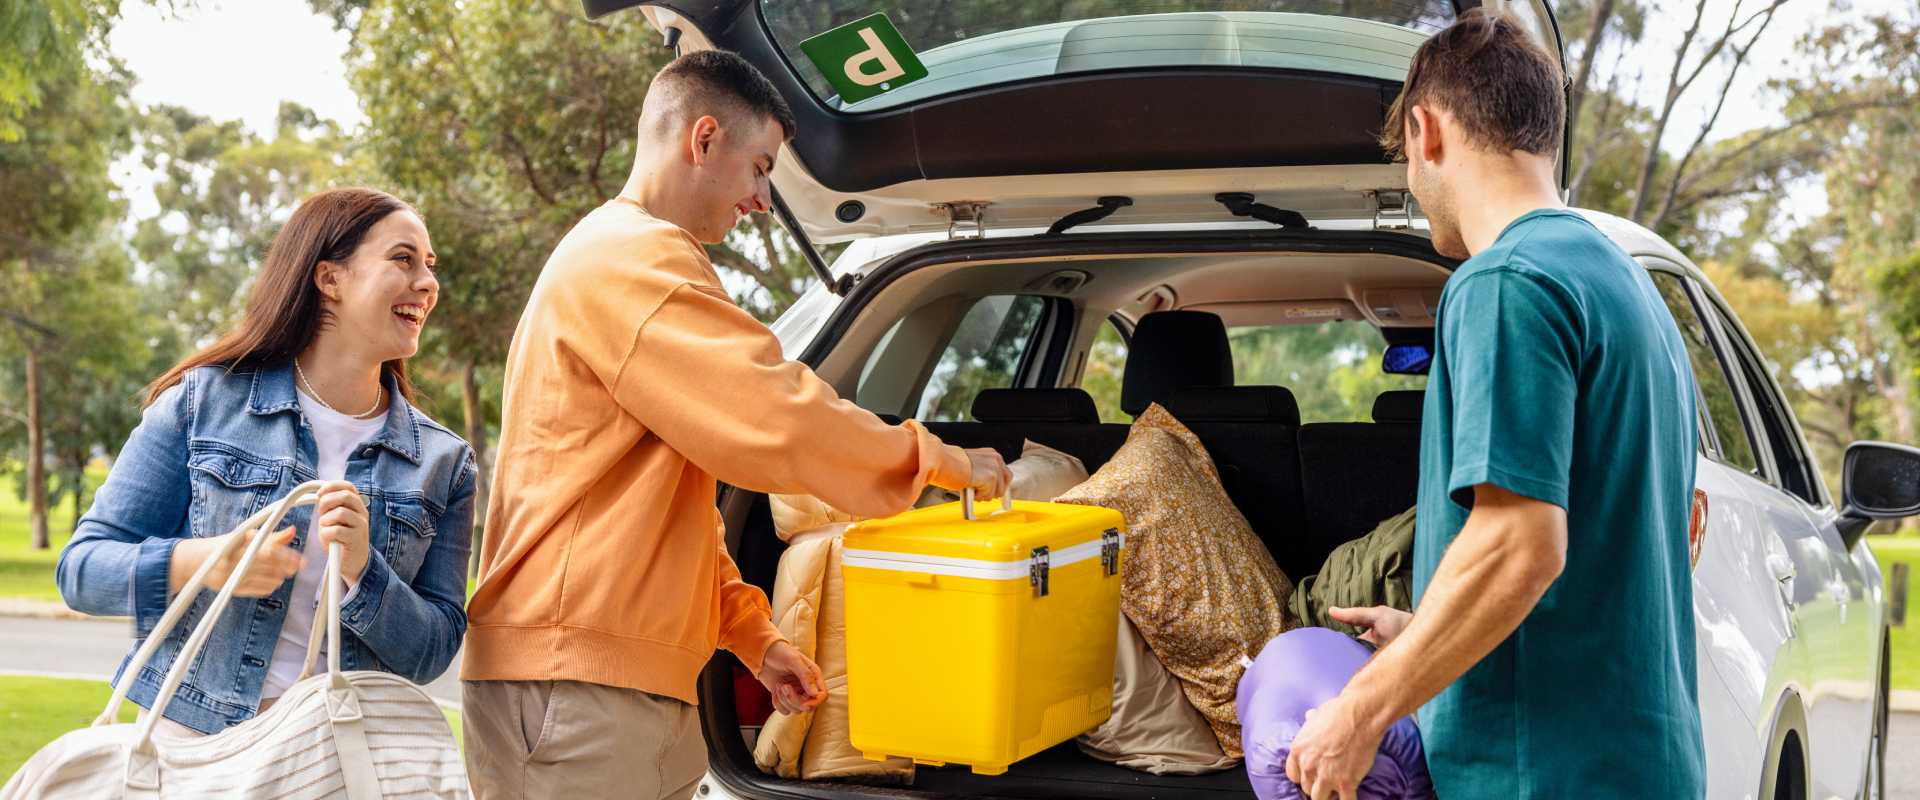 Three people packing the boot of a car for a picnic